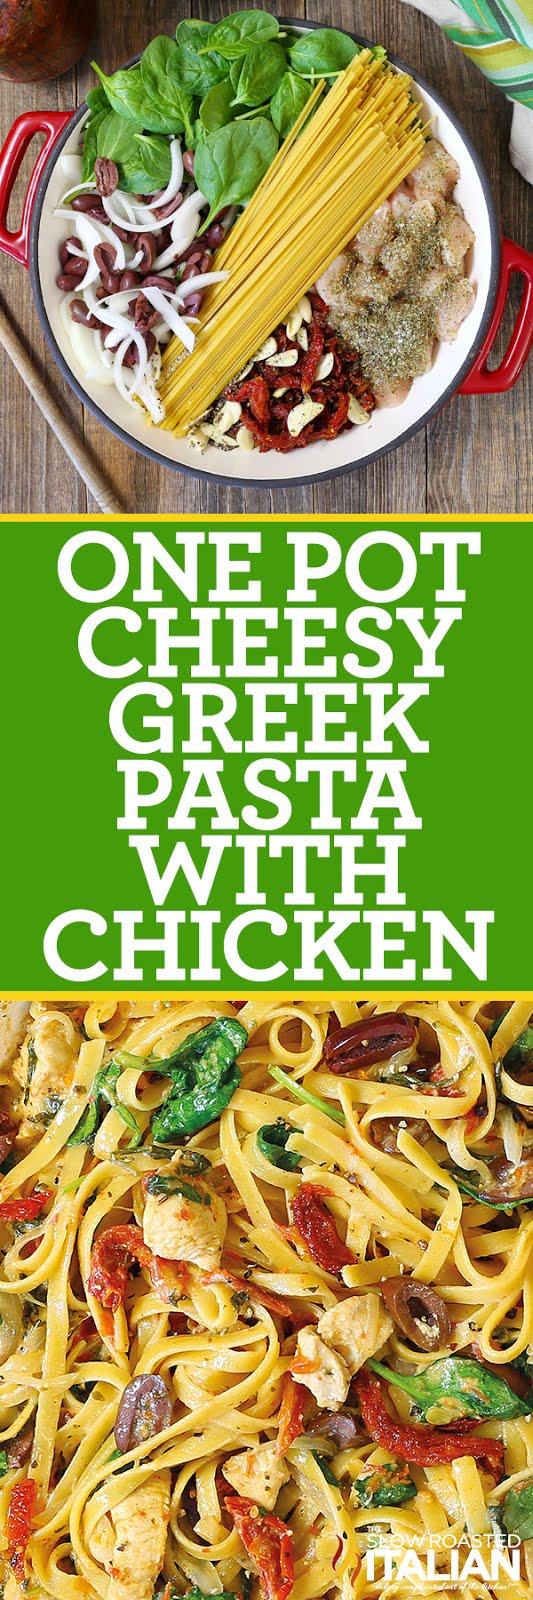 titled image for Pinterest (and shown): One Pot Cheesy Greek Pasta with Chicken